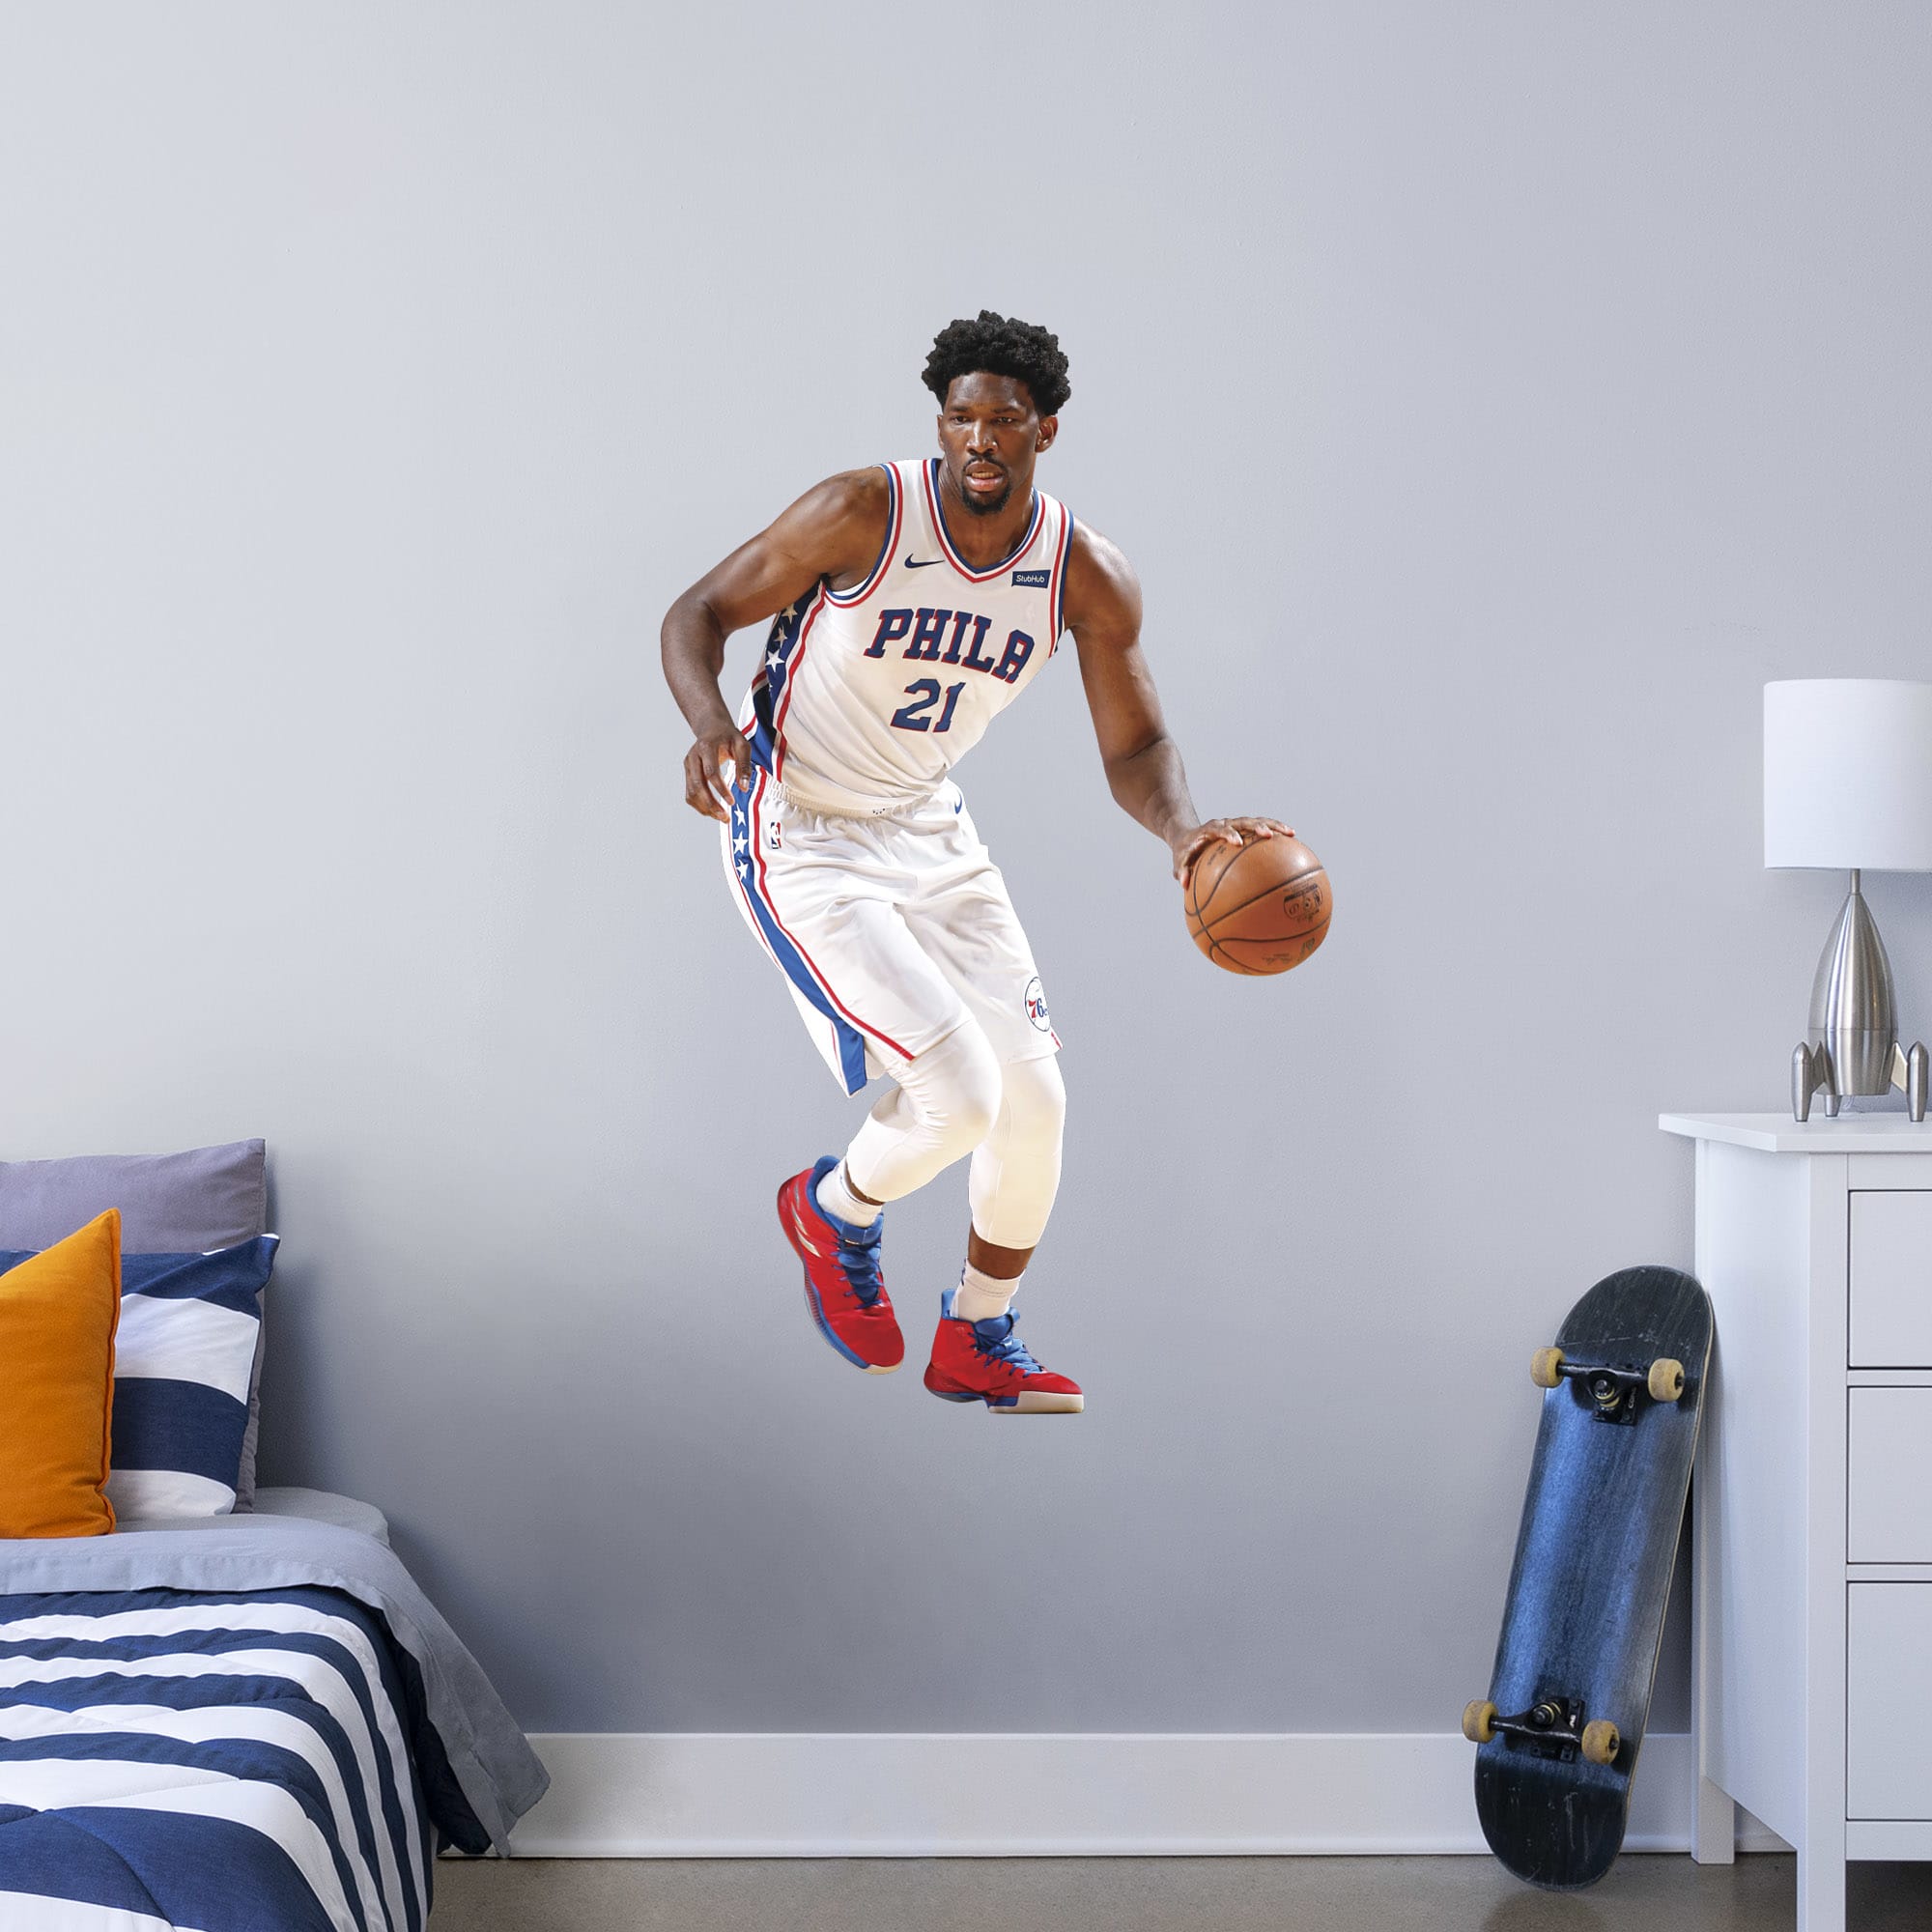 Joel Embiid for Philadelphia 76ers - Officially Licensed NBA Removable Wall Decal Giant Athlete + 2 Decals (32"W x 53"H) by Fath